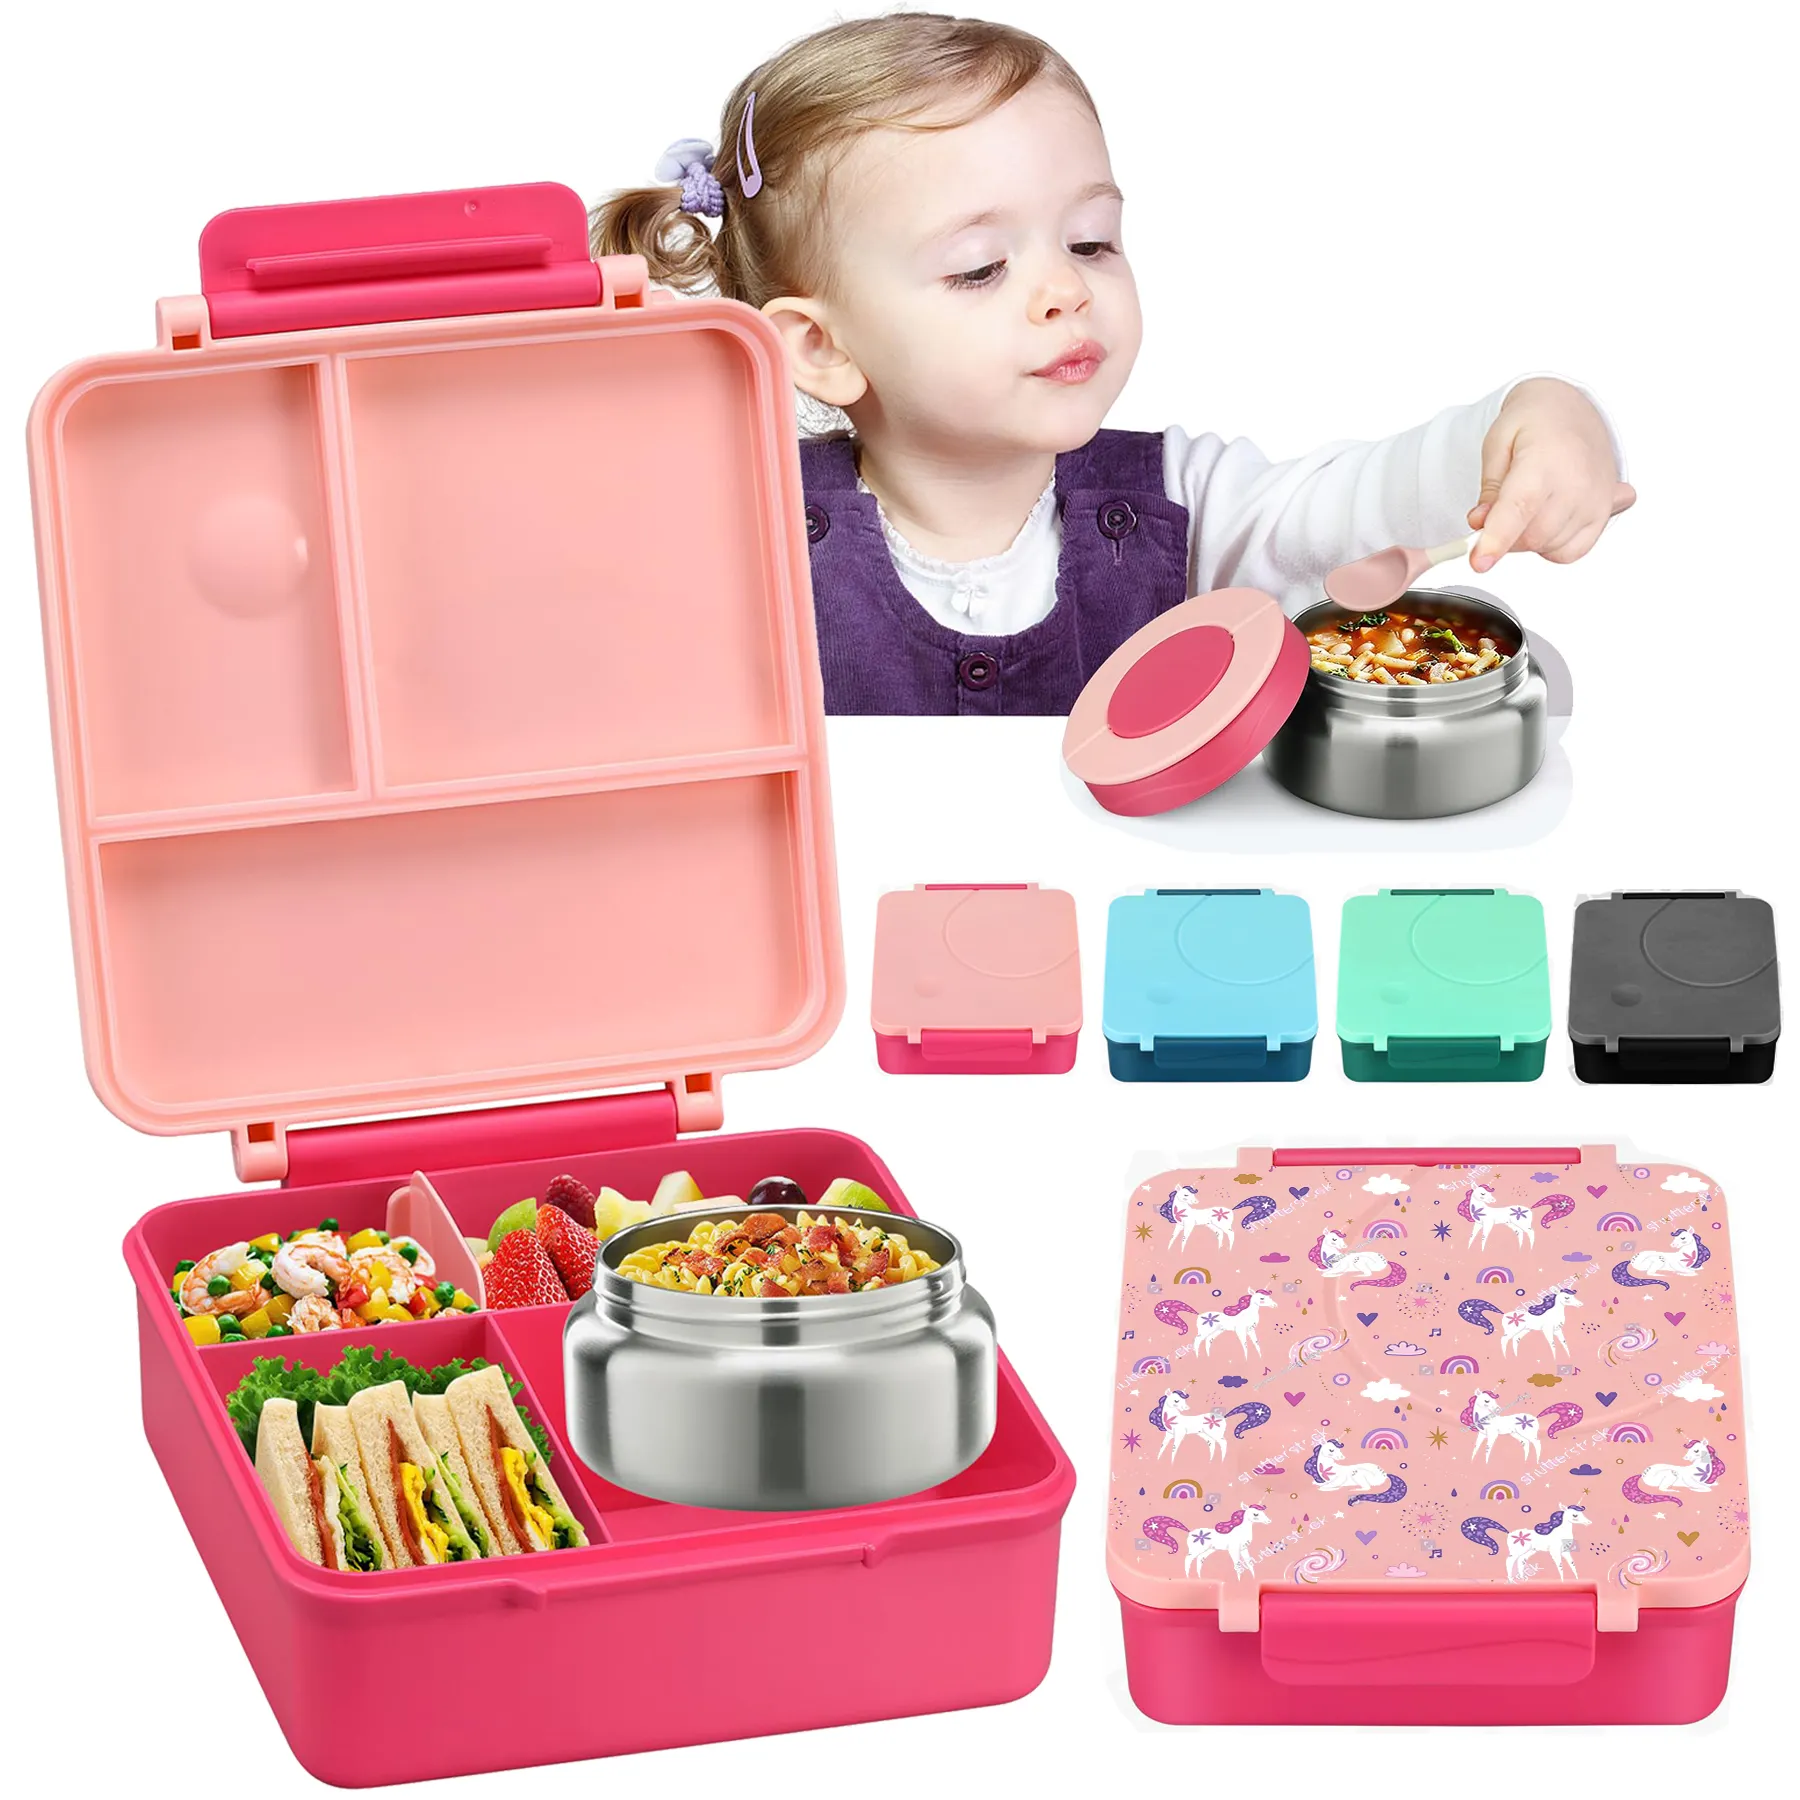 Hot Food Insulated Food Jar Kid Bento Box Food Container School Insulated Bento Lunch Box For Kids With 8oz Soup Thermo